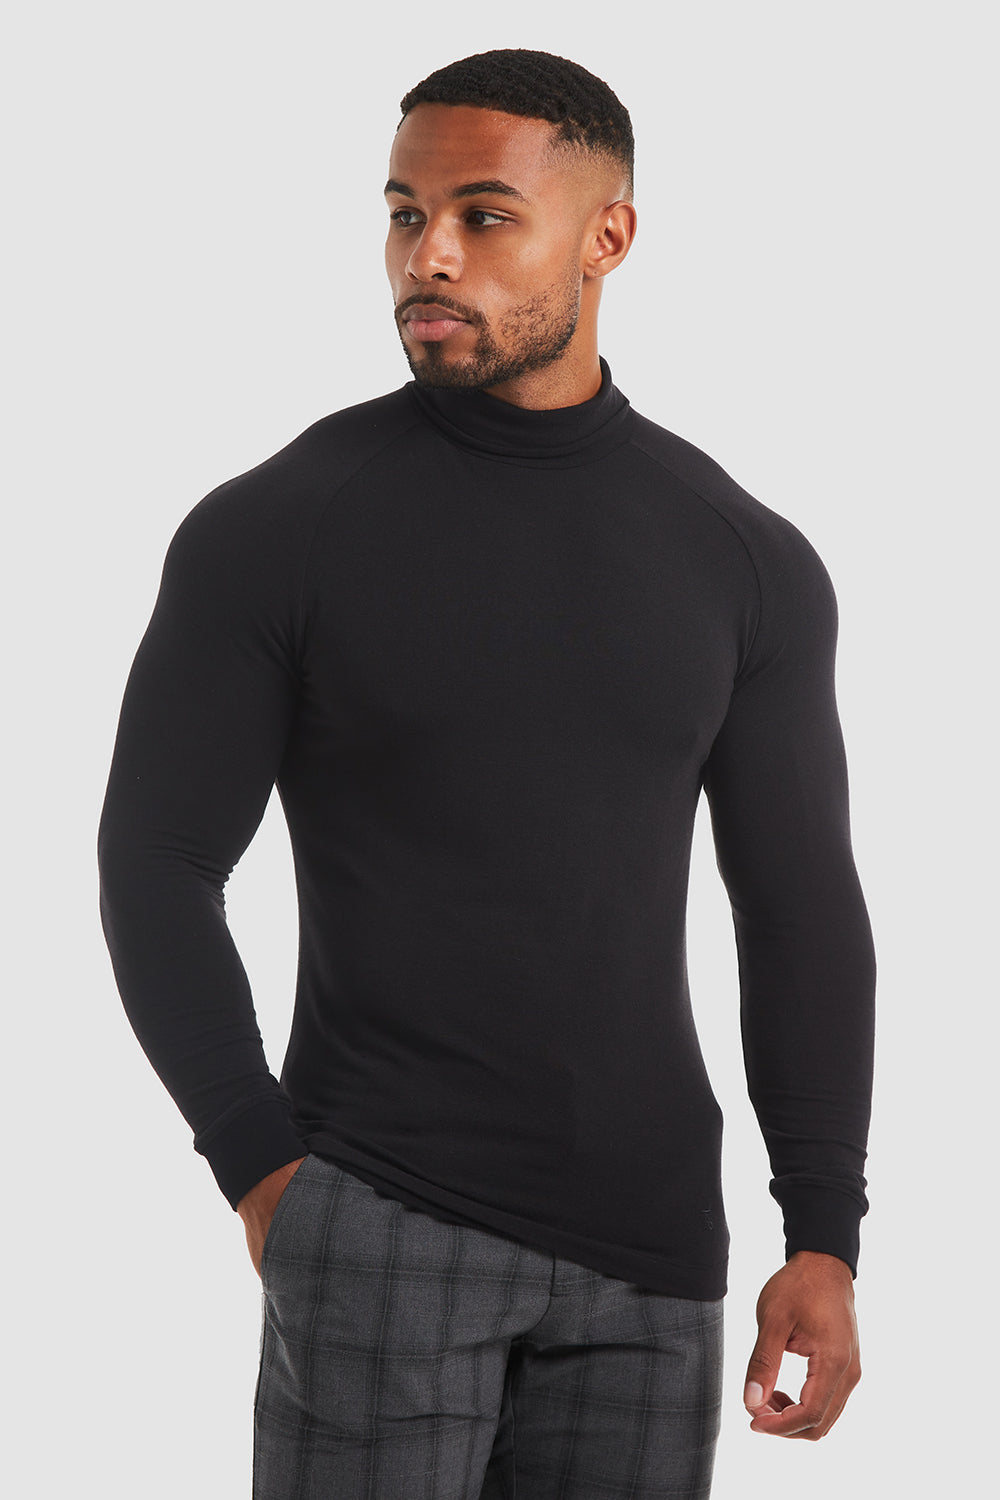 Knit Look Jersey TAILORED Black ATHLETE USA Neck in - (LS) - Roll